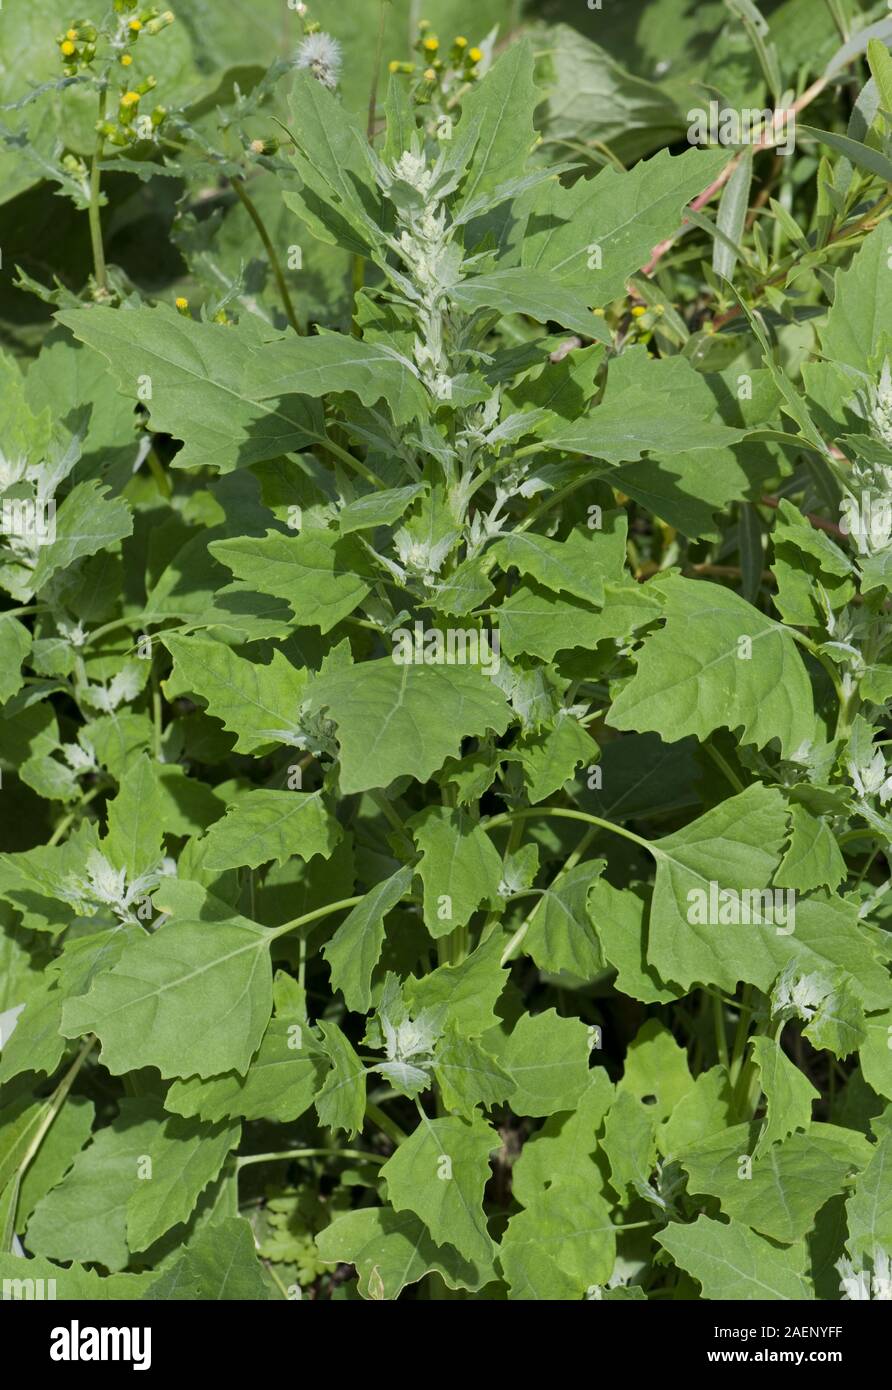 Fat hen or pigweed, Chenopodium album, plant at stem extension with early flower buds, Berkshire, June Stock Photo